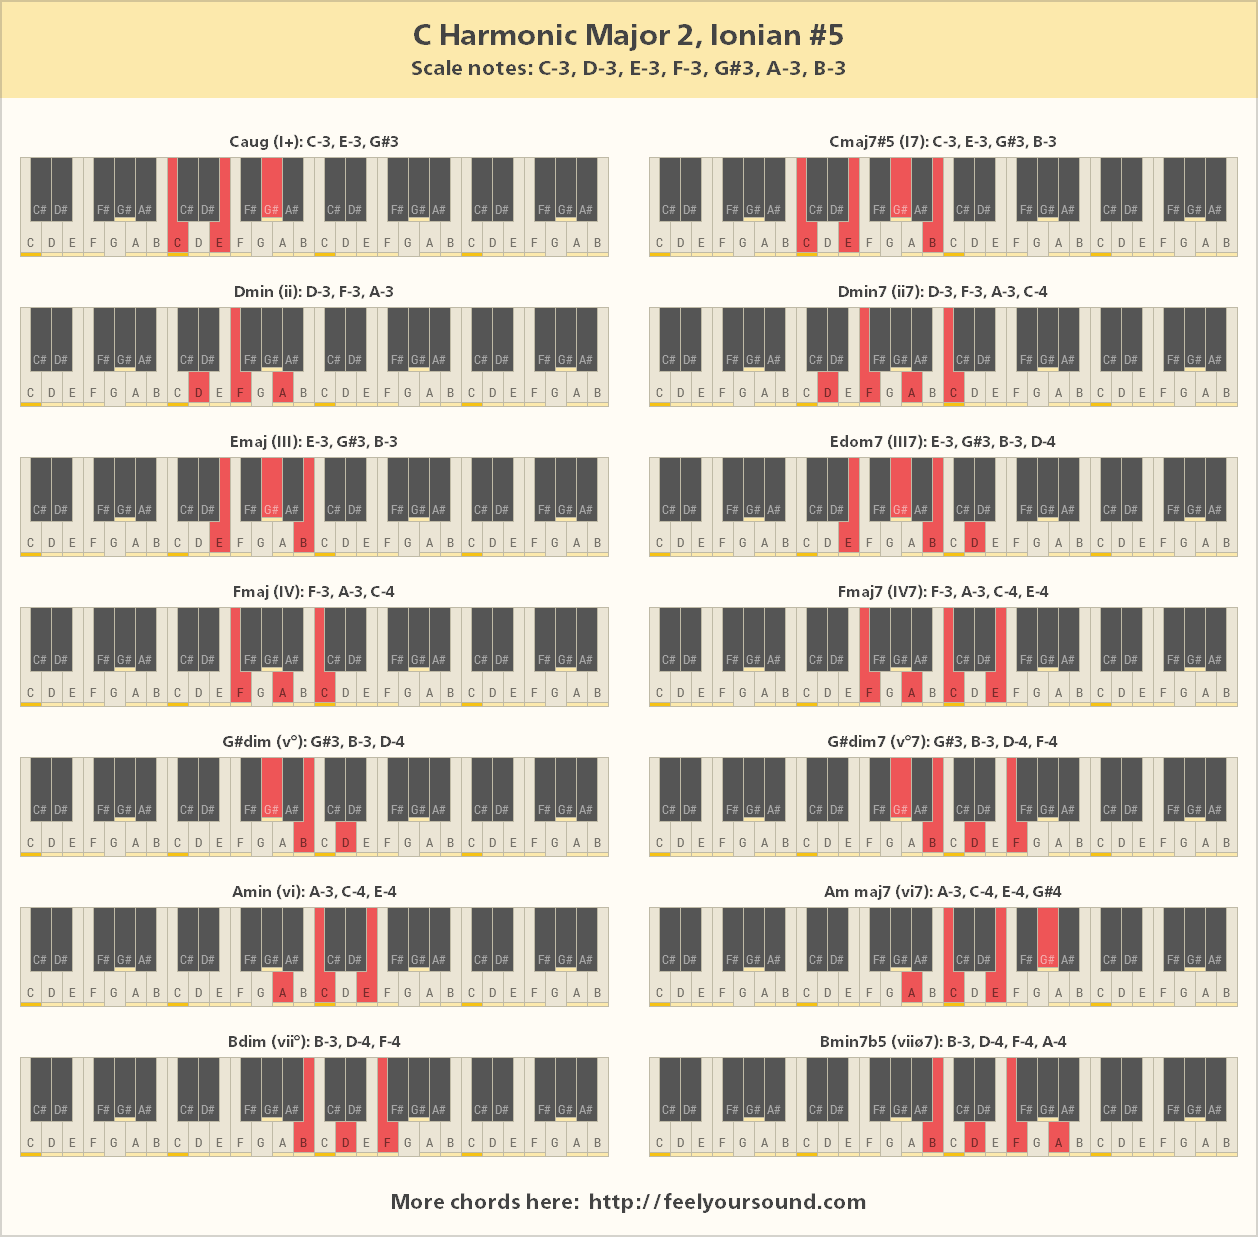 All important chords of C Harmonic Major 2, Ionian #5